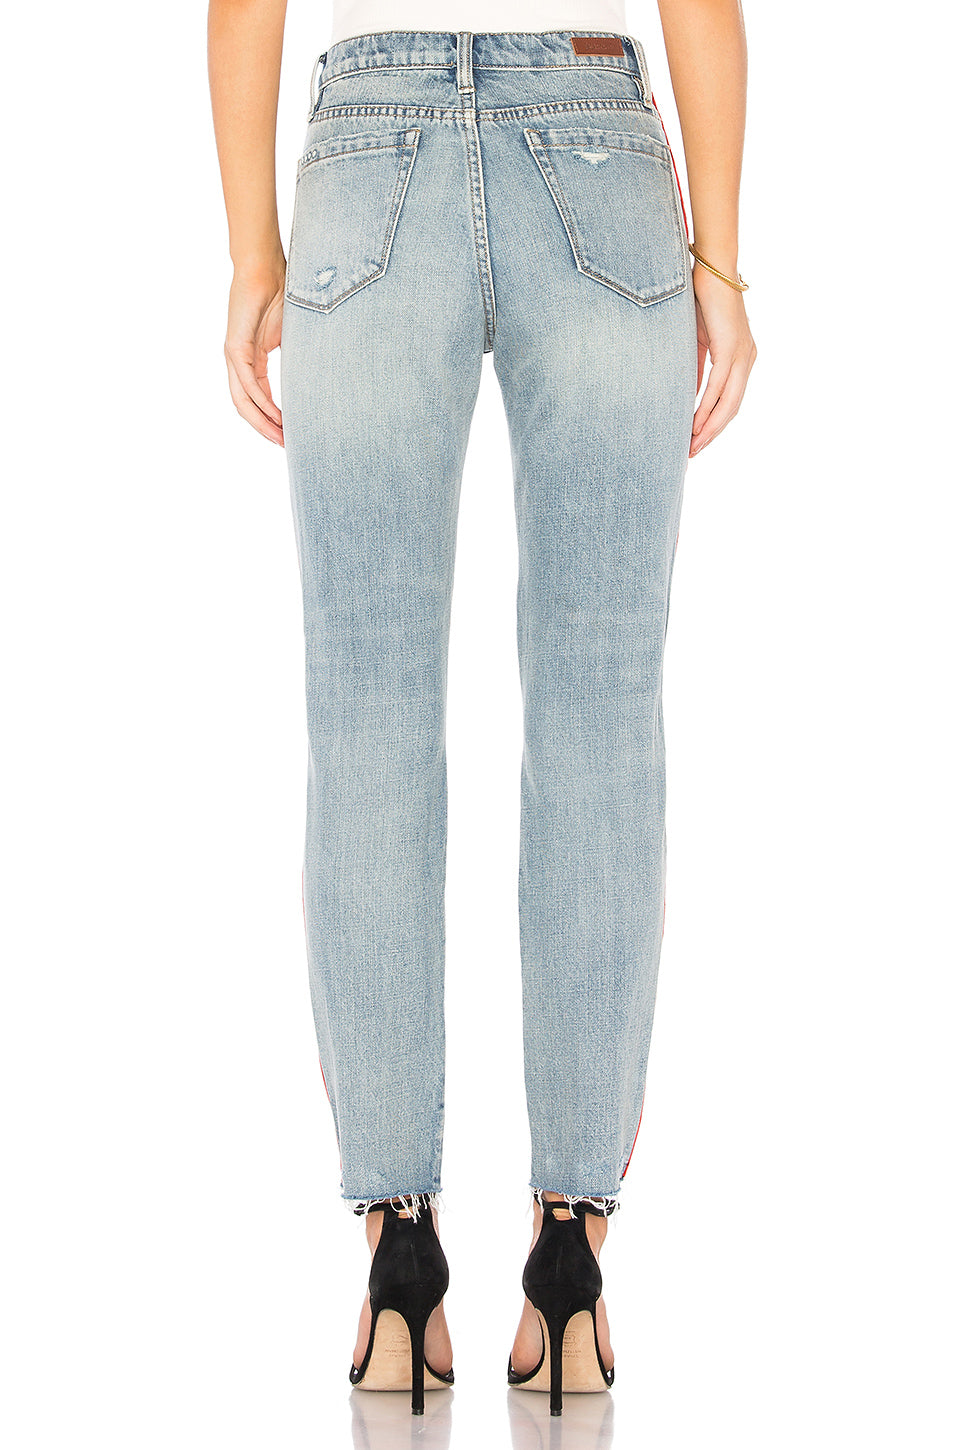 Blank NYC Now or Never Stripe High Rise Jeans